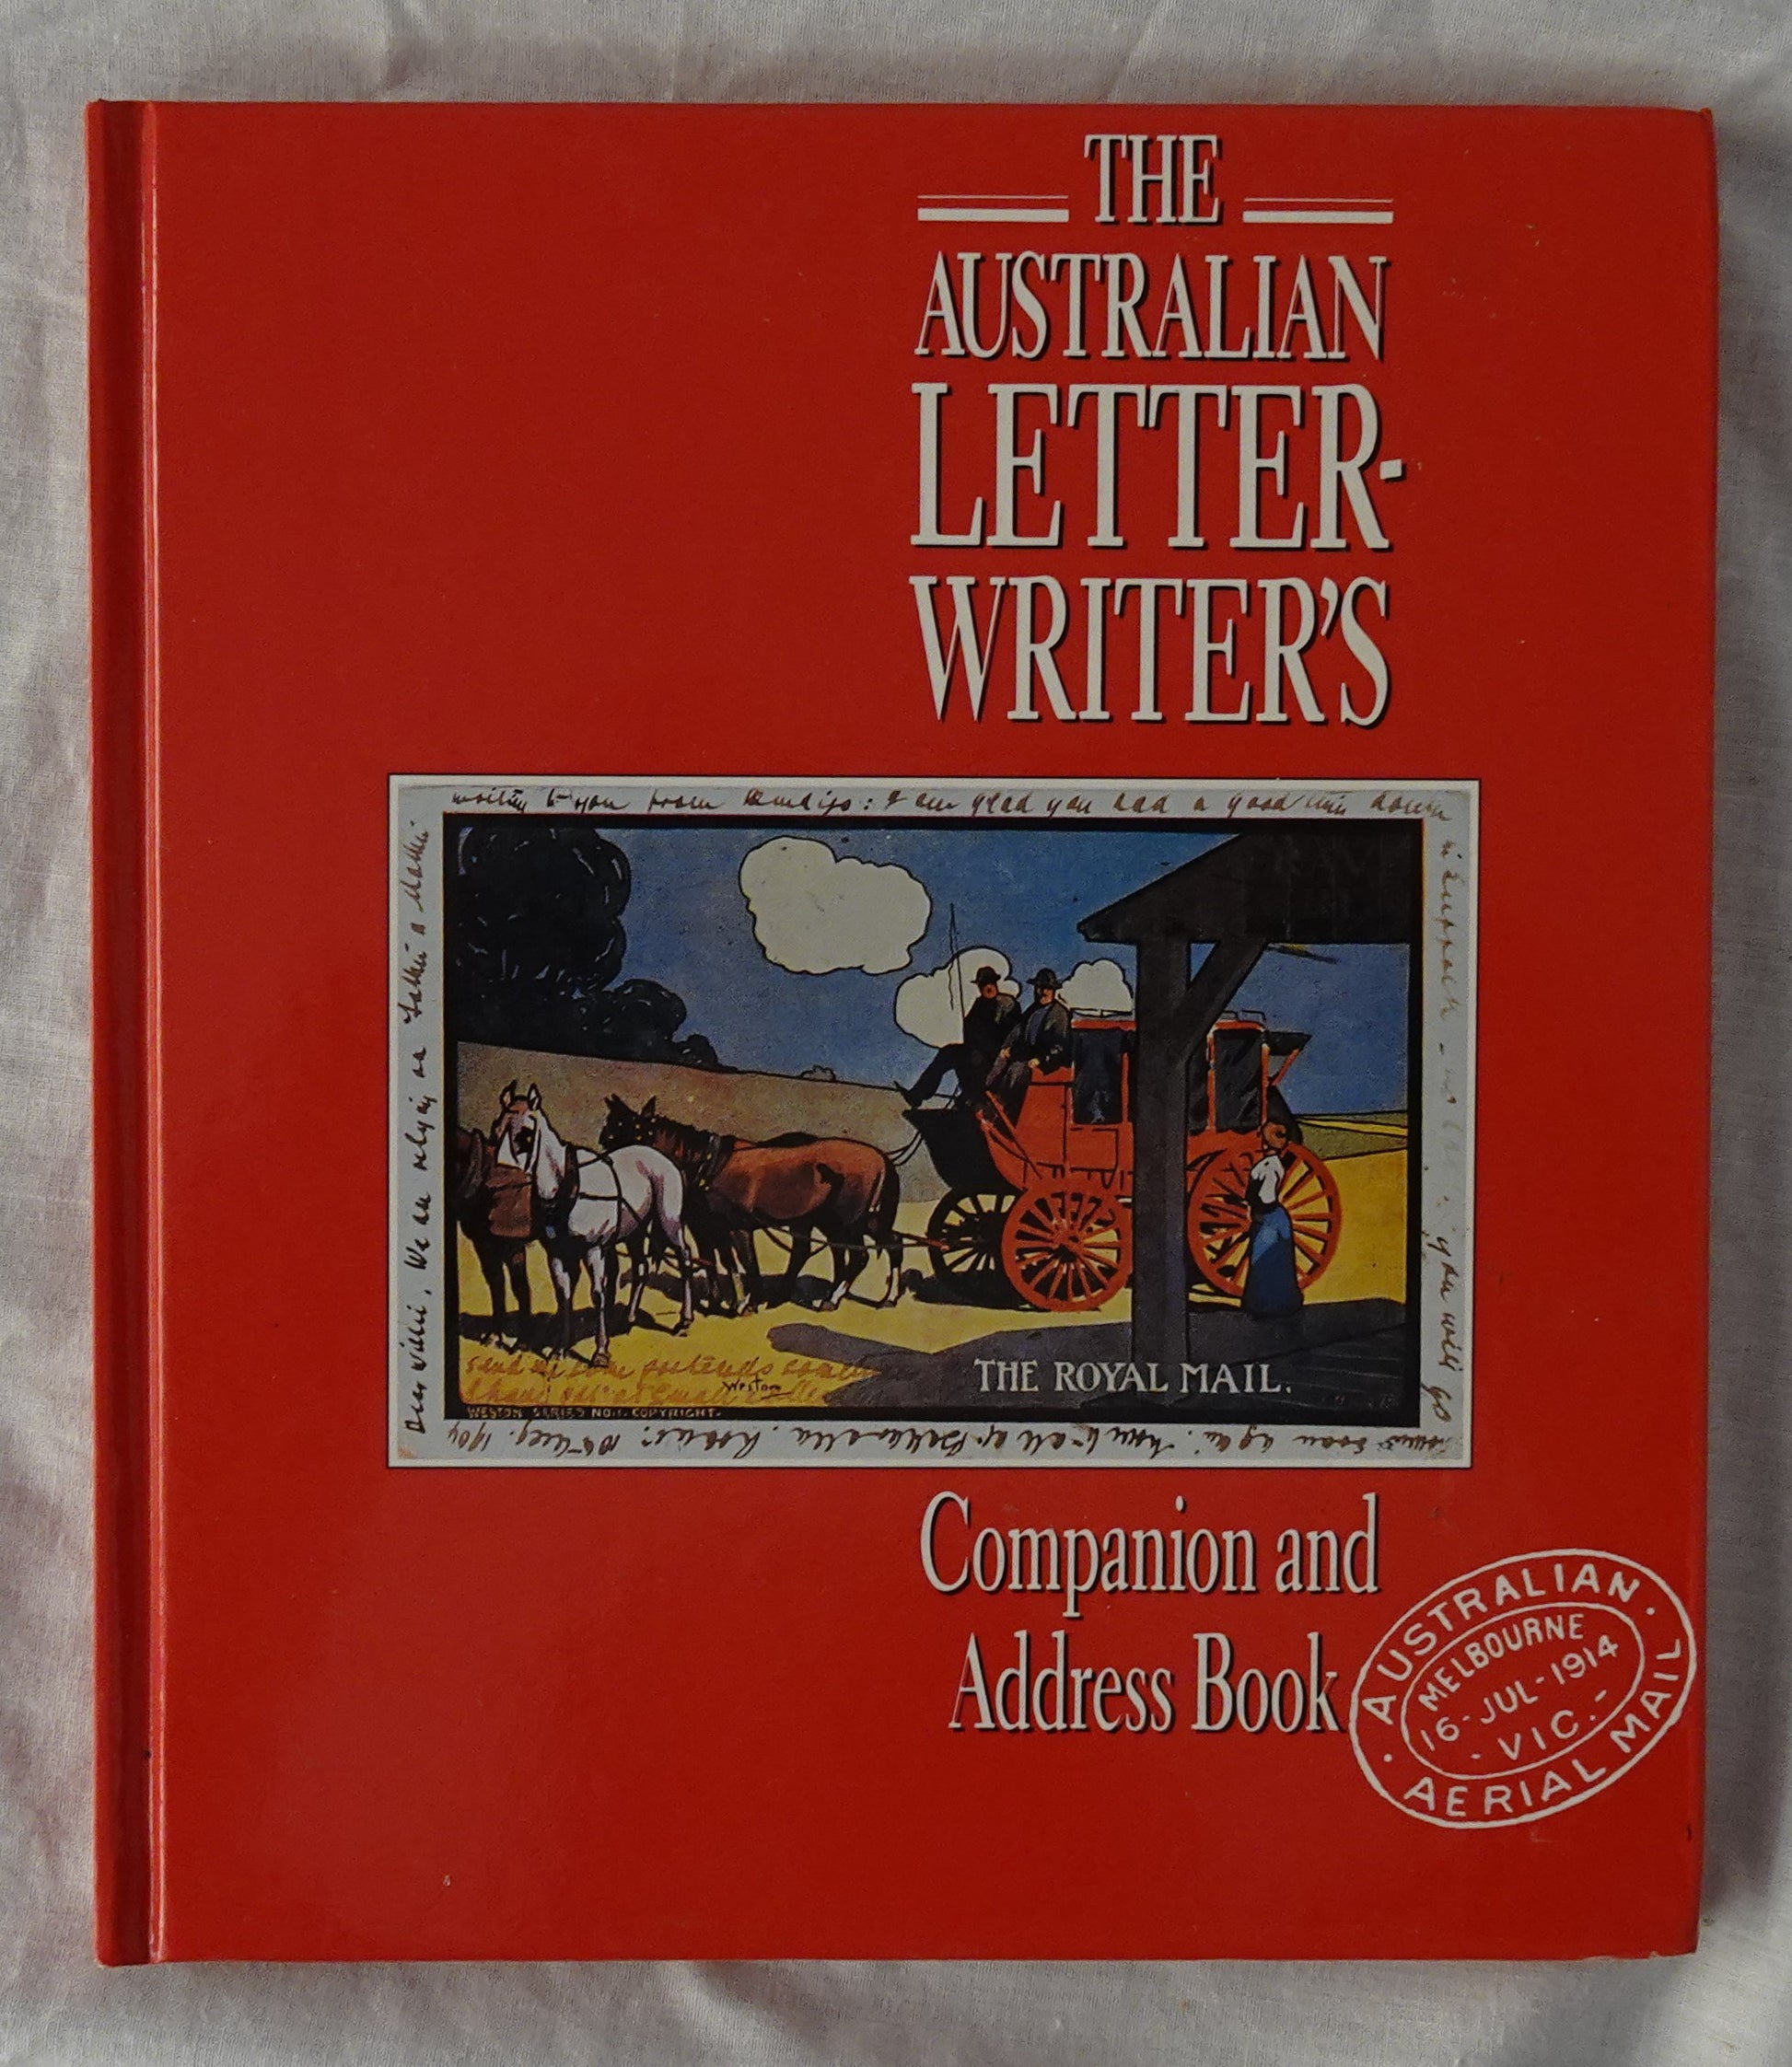 The Australian Letter Writers Companion and Address Book  Compiled by Barry Watts